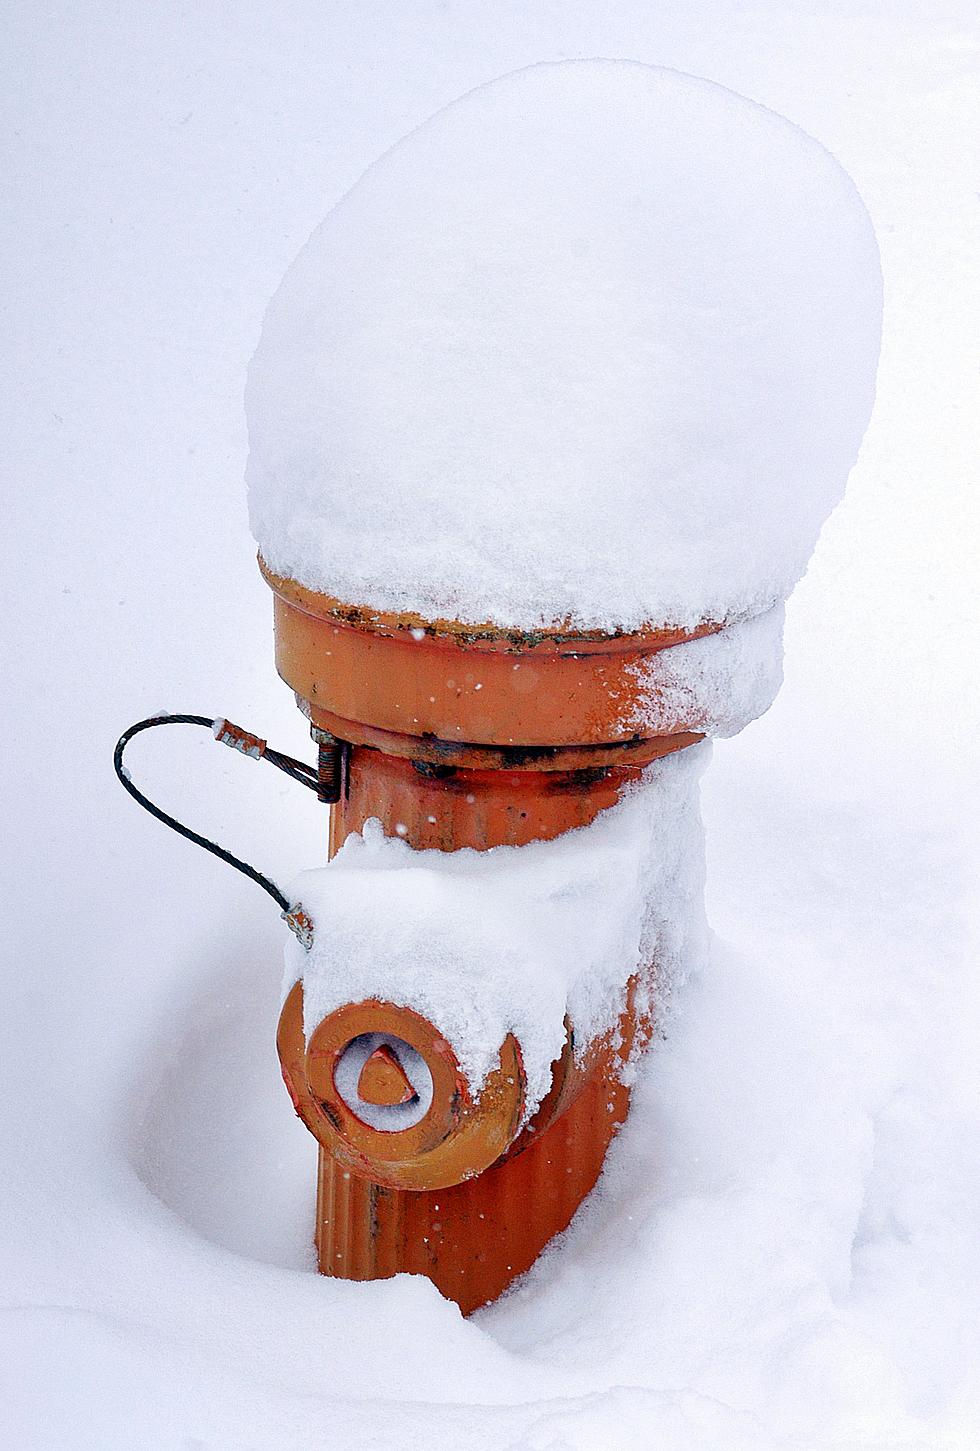 Whose Responsibility Is It To Shovel Near Fire Hydrants In CNY?